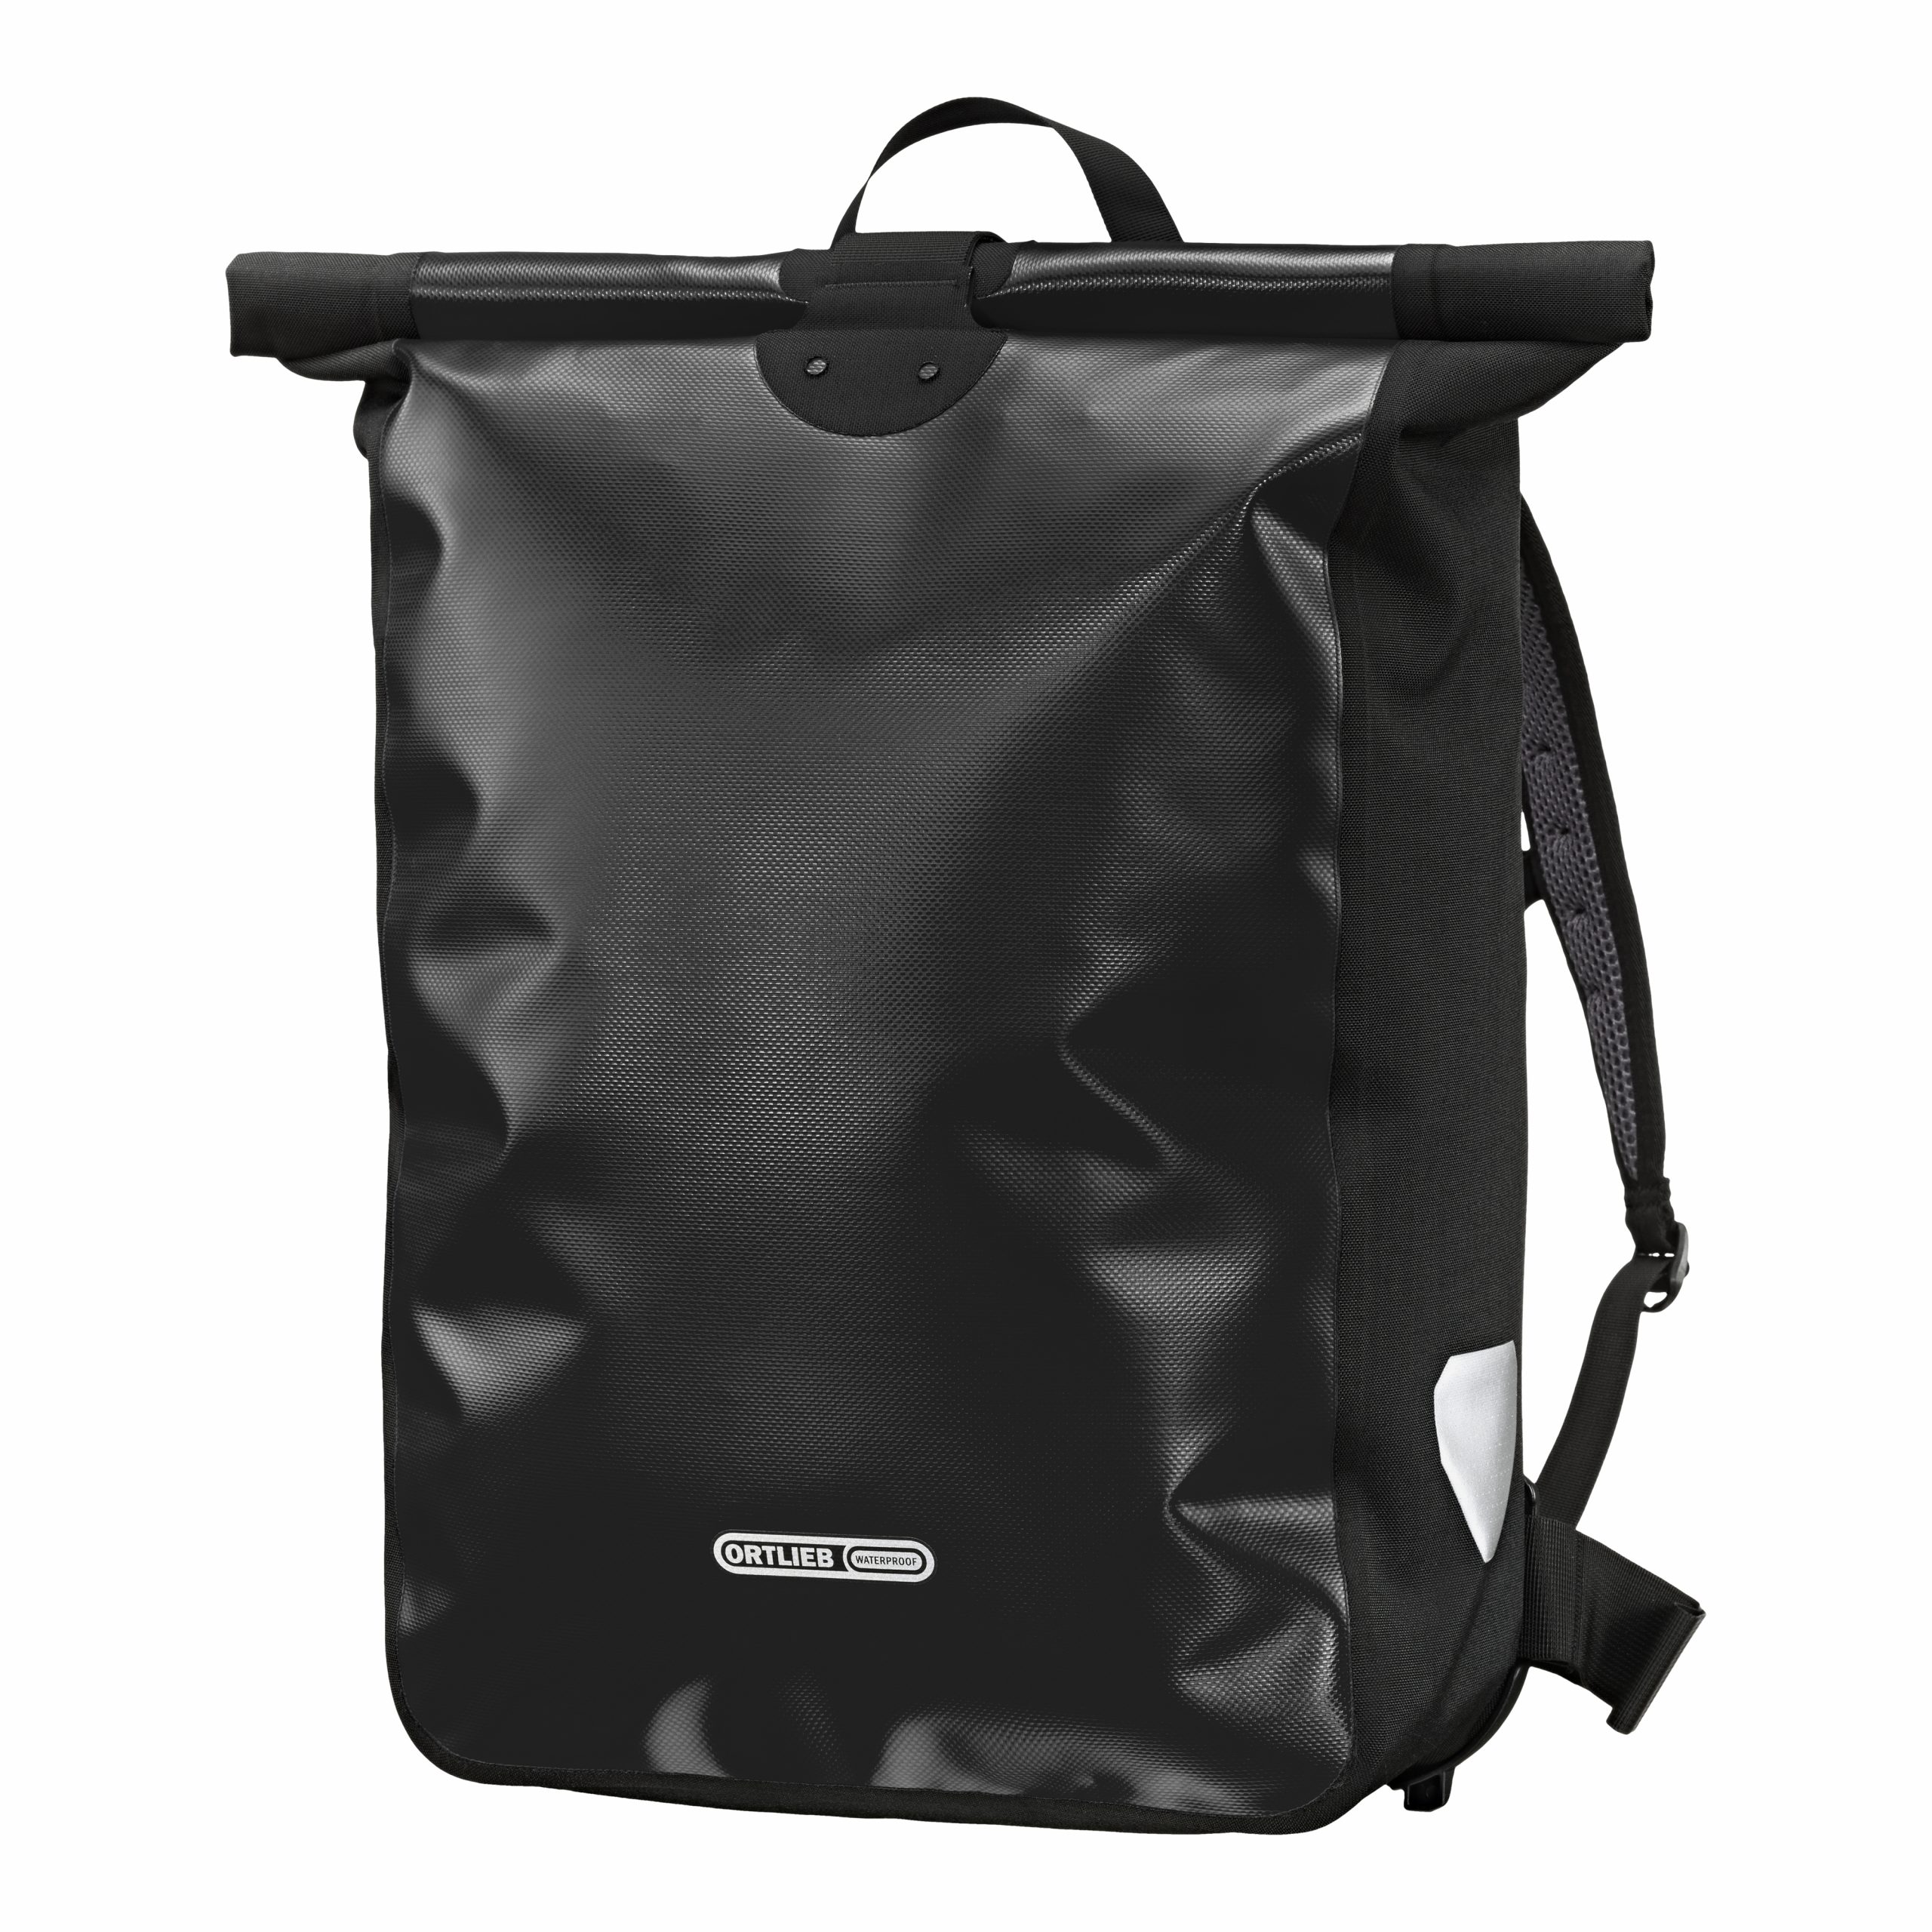 Amazon.com: Messenger Bags - Messenger Bags / Luggage & Travel Gear:  Clothing, Shoes & Jewelry